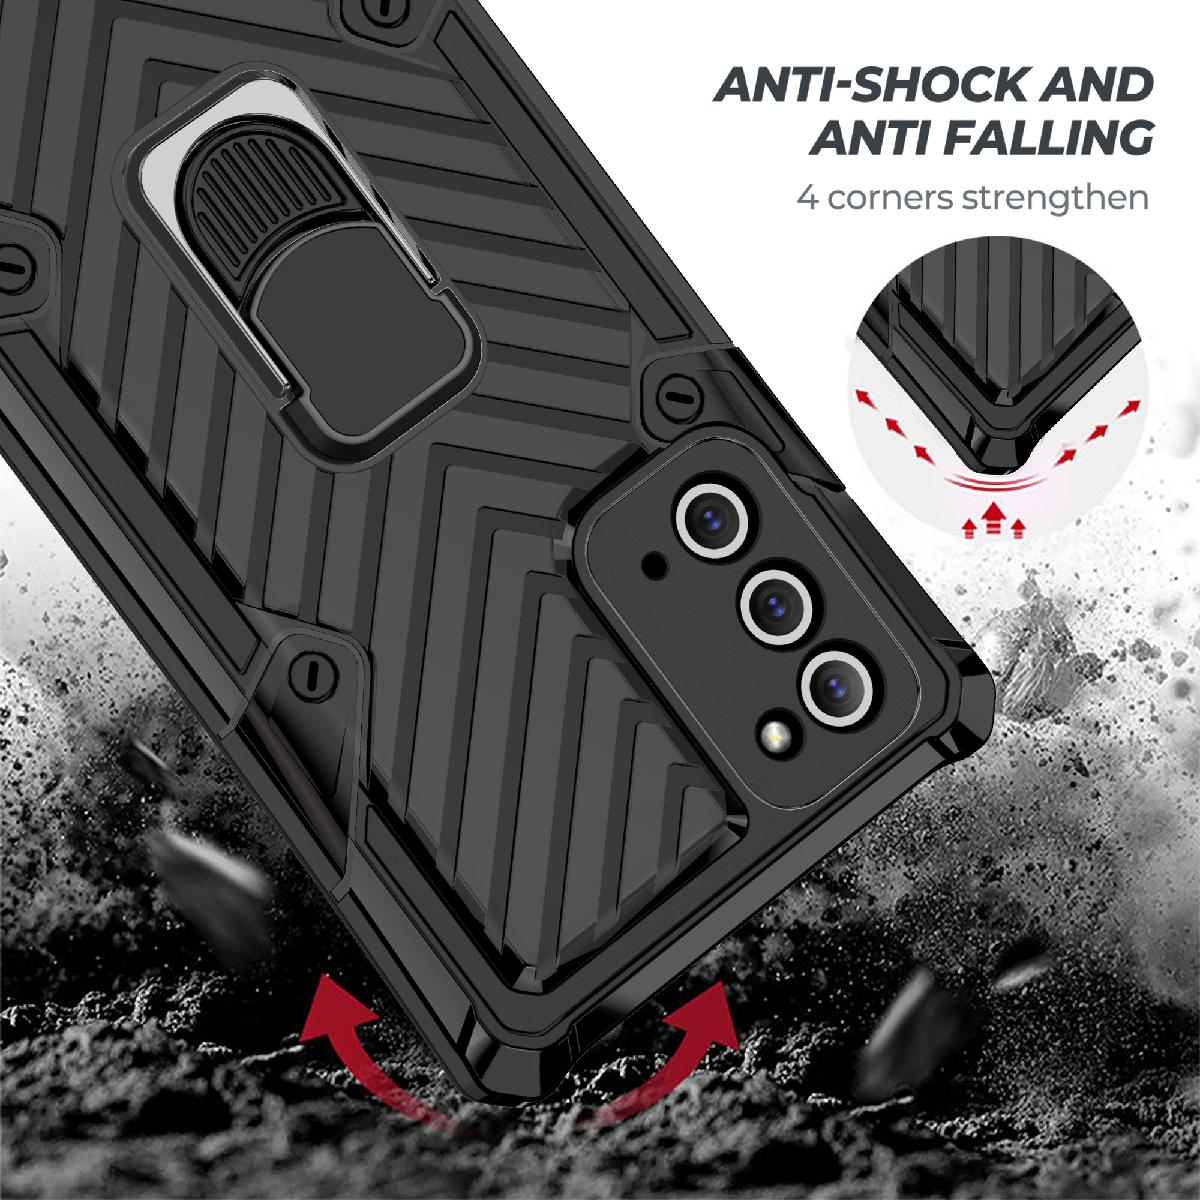 Kickstand Anti-Shock And Anti Falling Case for SAMSUNG GALAXY NOTE 20 In Black